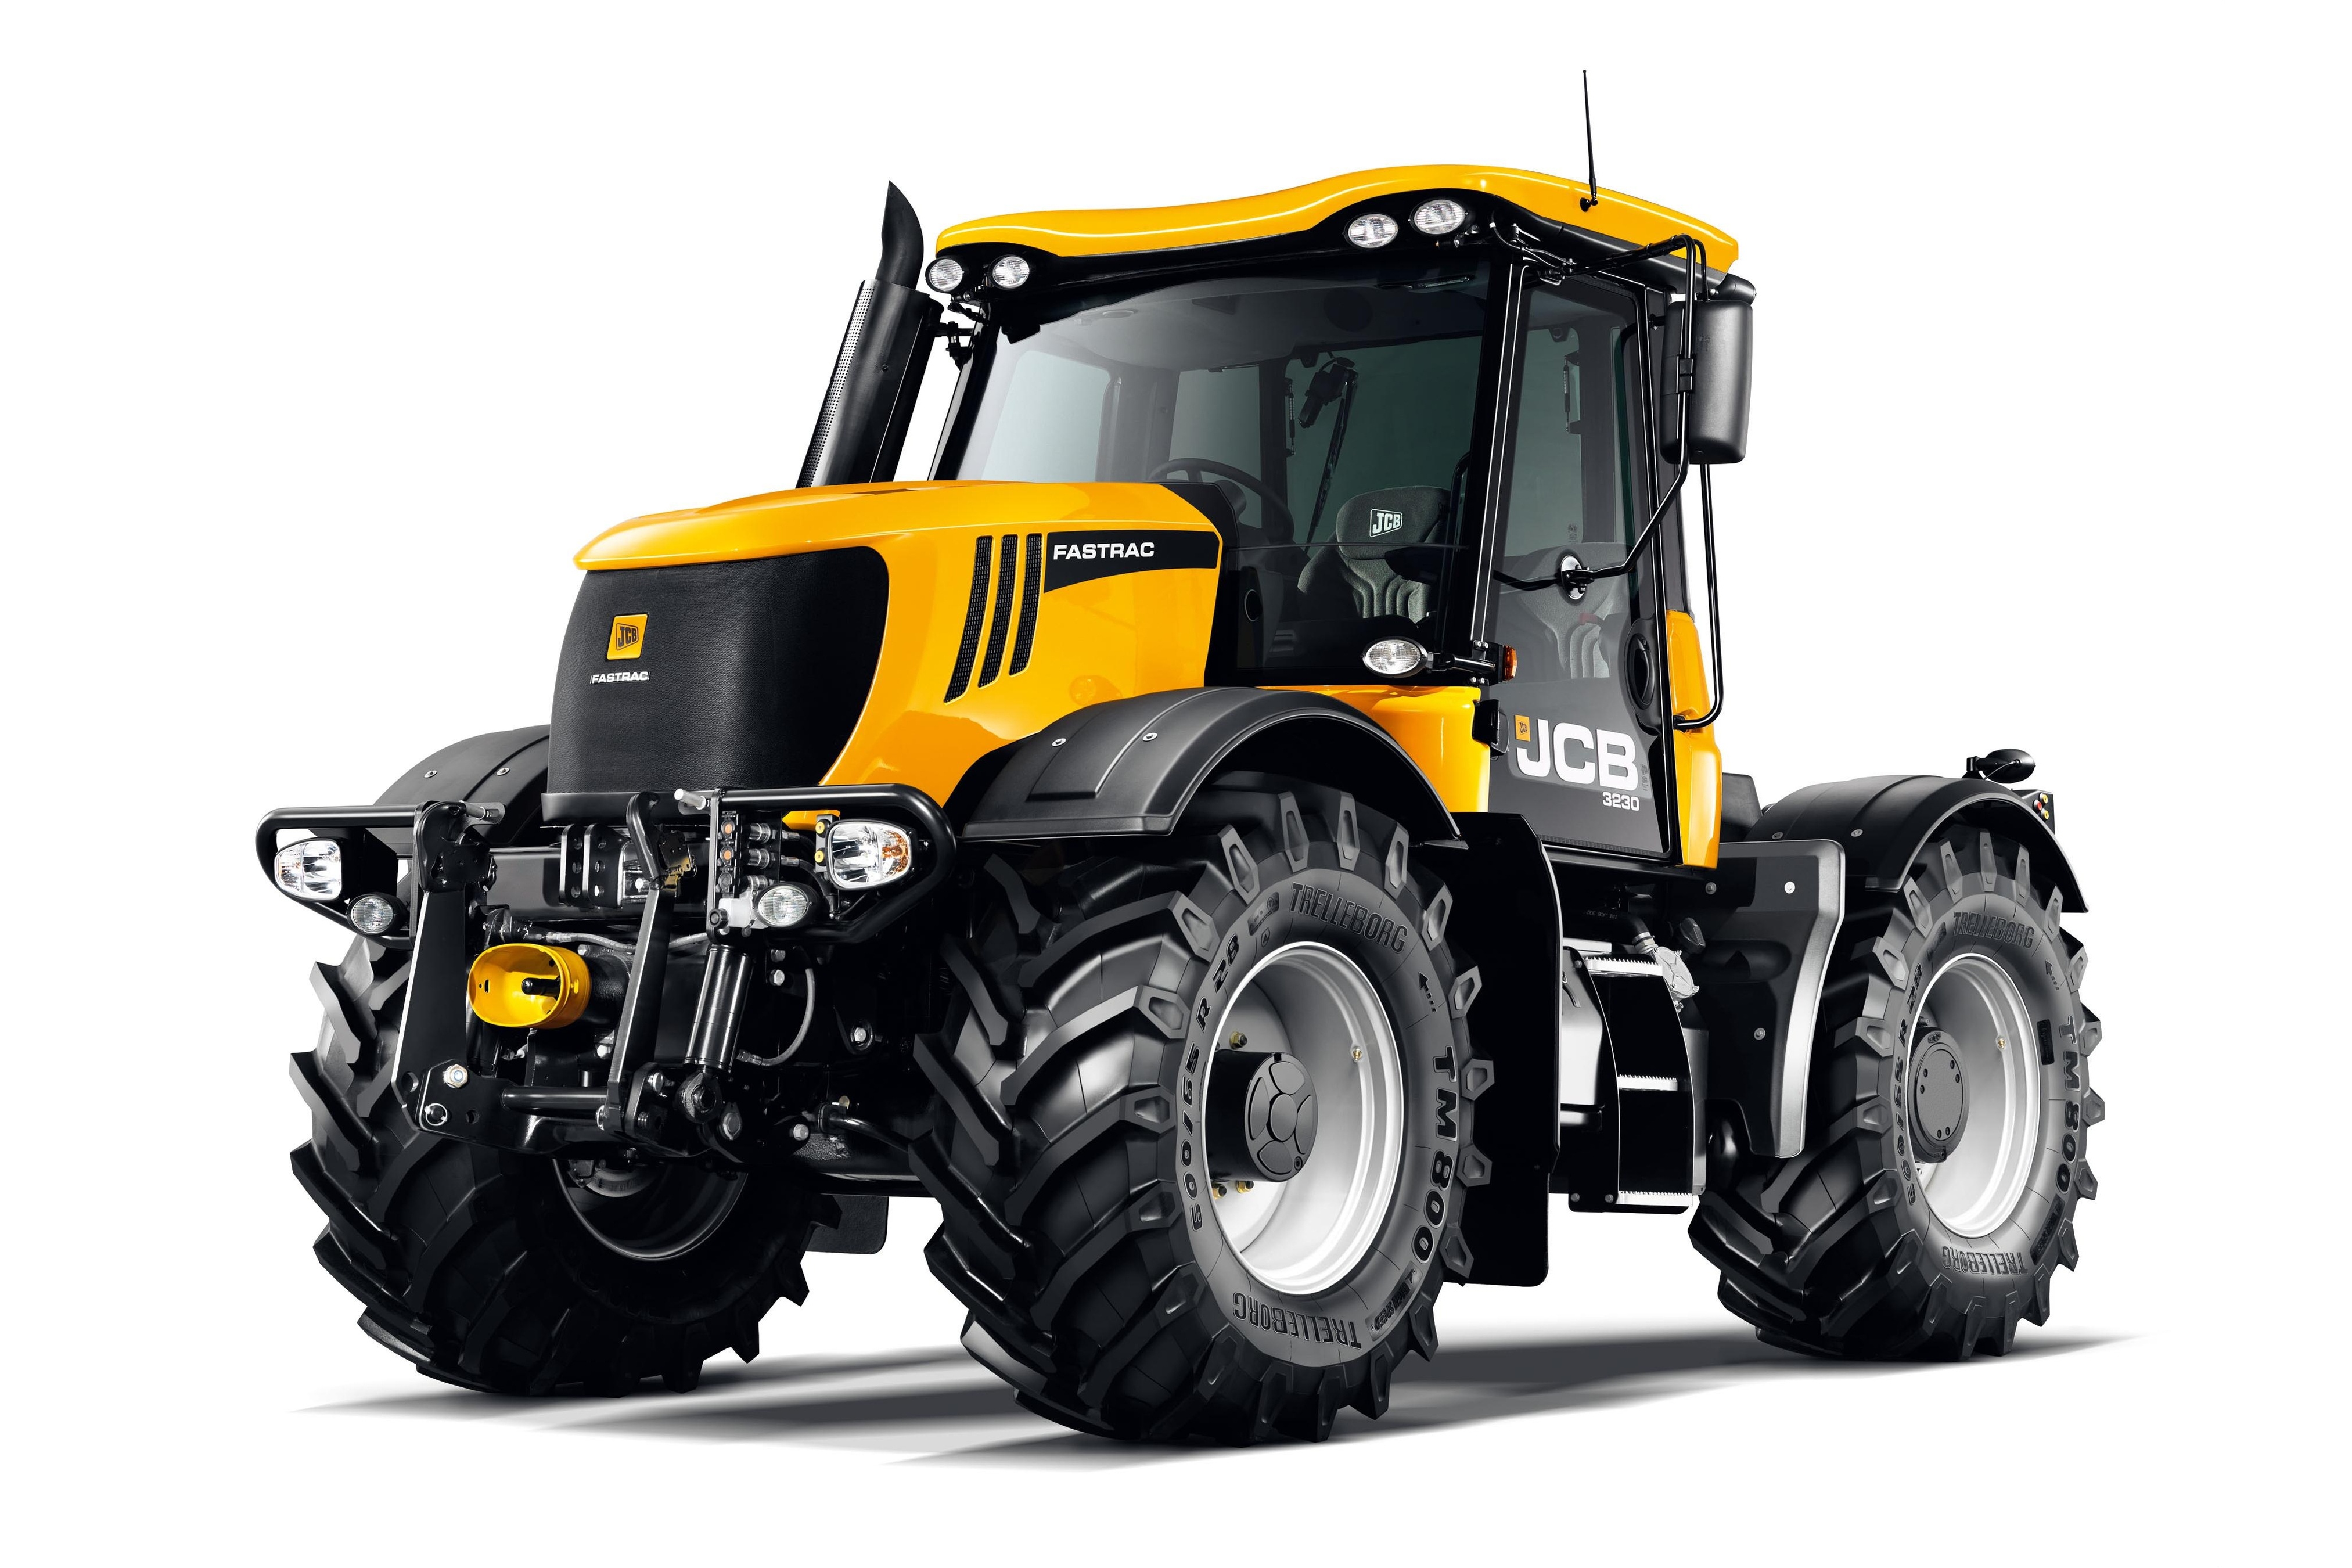 Tractors Vehicle Fastrac 3230 Simple Background 4050x2700